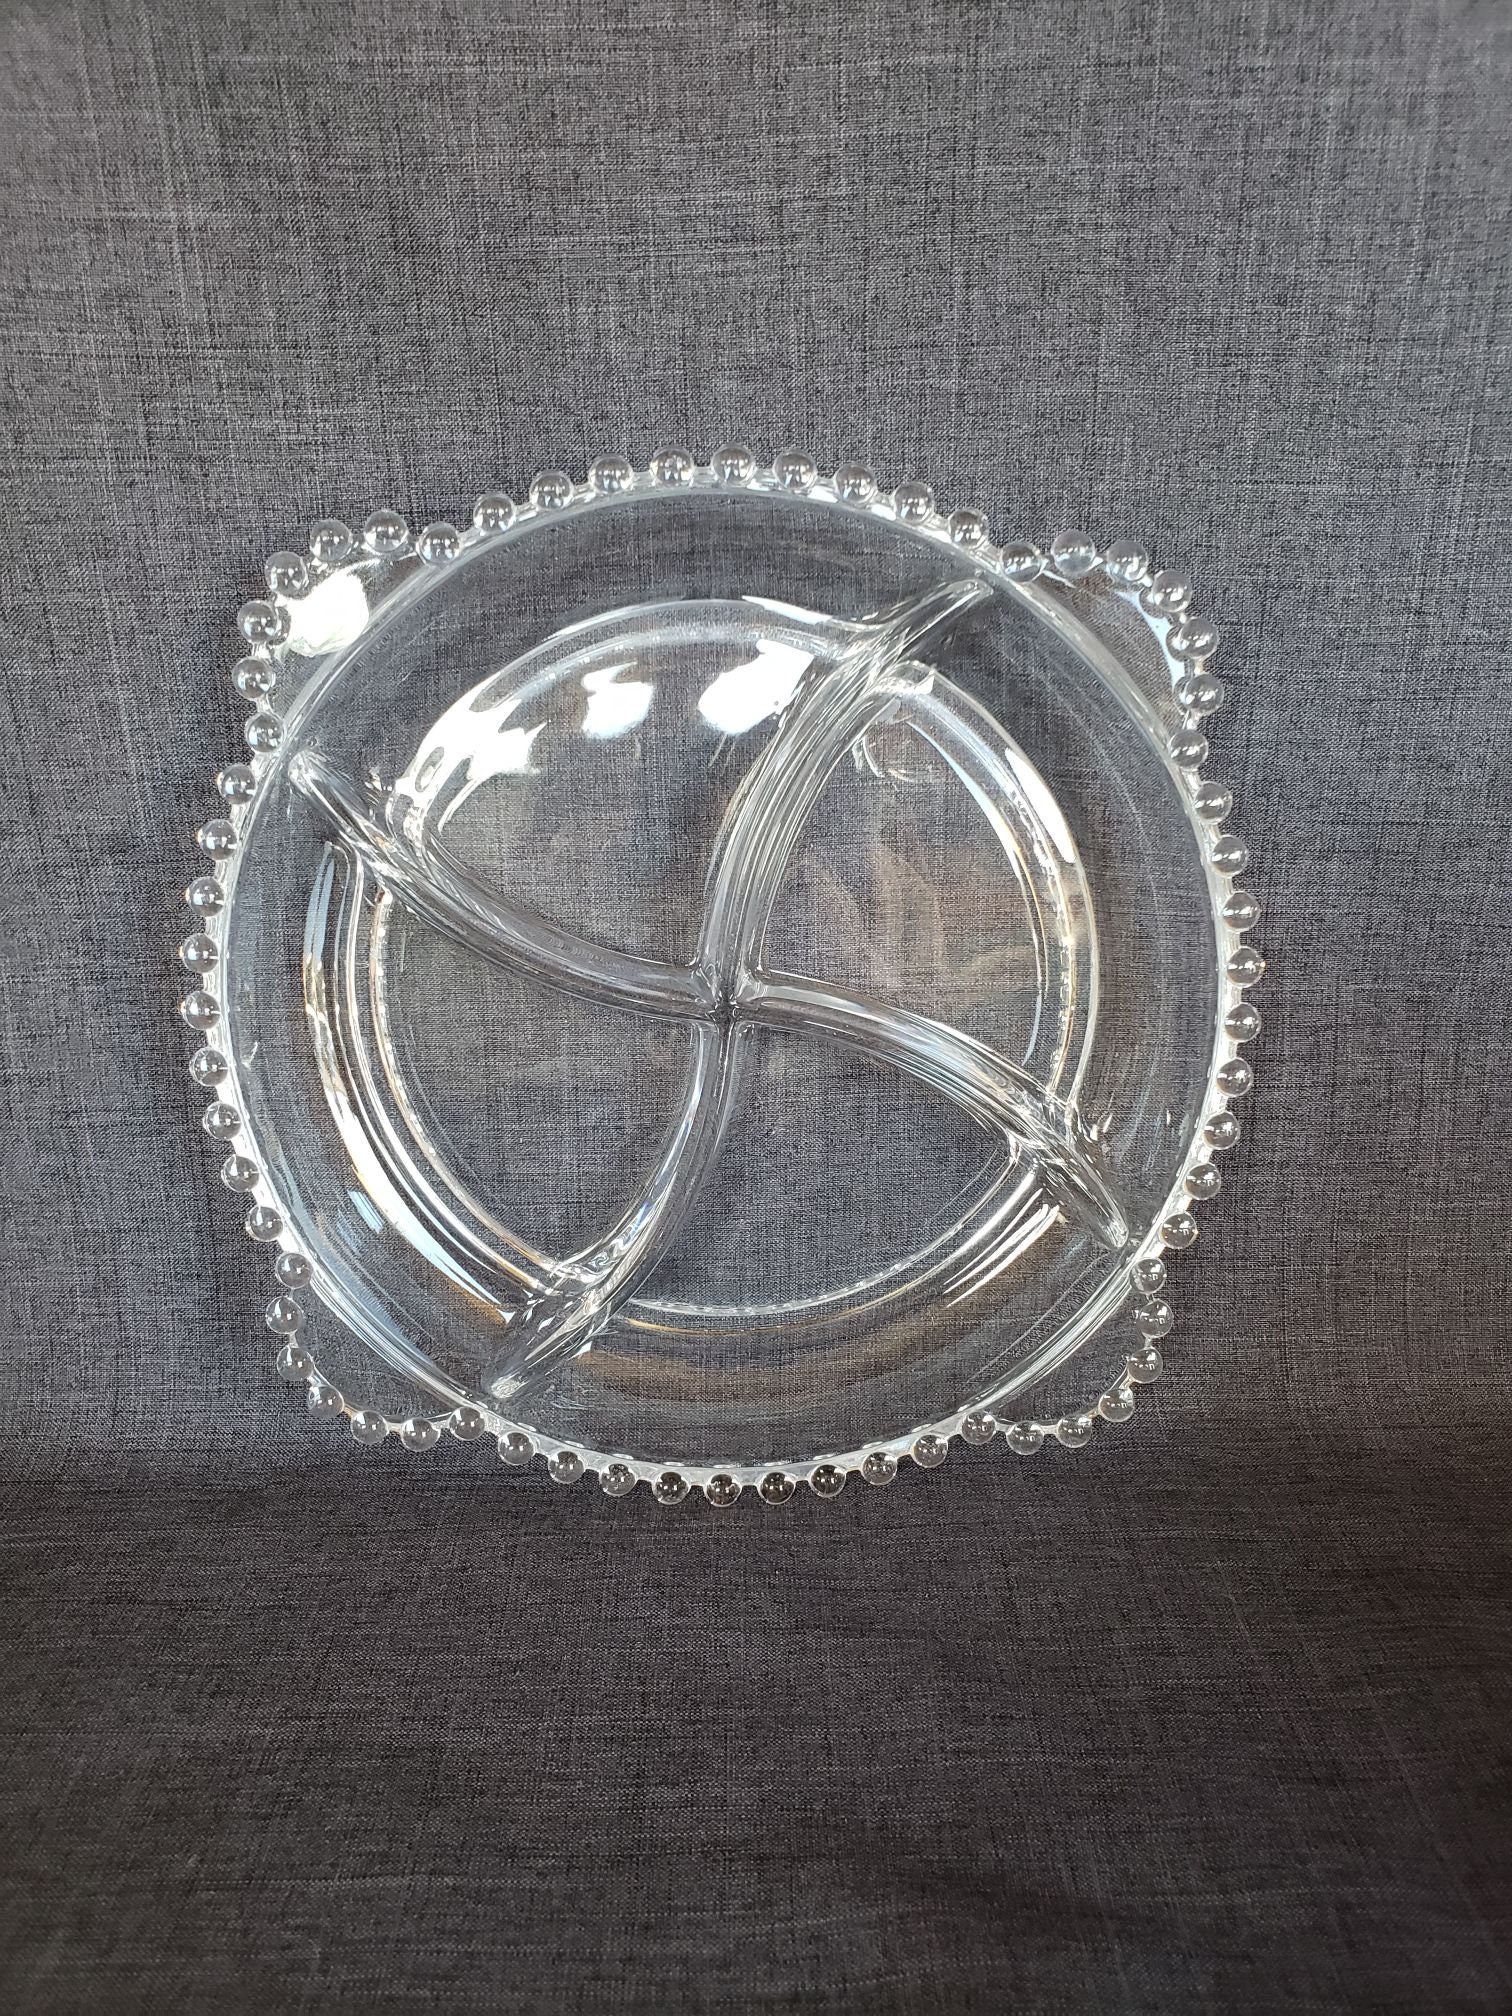 Vintage Candlewick Divided Serving Tray Candlewick Glass Etsy